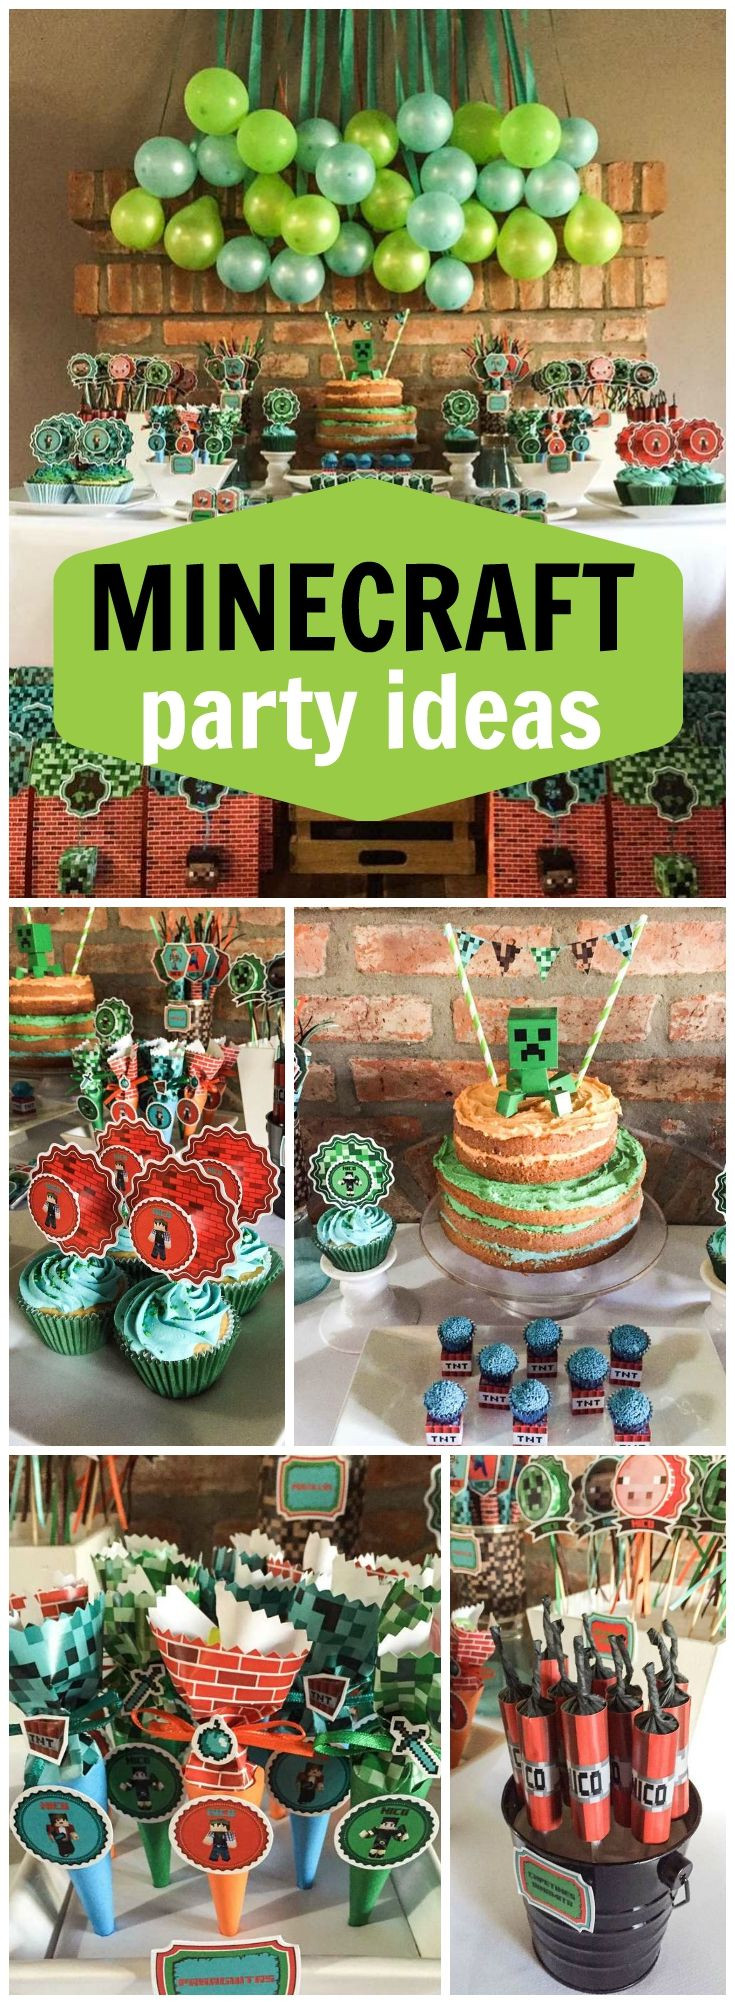 Minecraft Decorations For Birthday Party
 297 best images about Minecraft Party Ideas on Pinterest